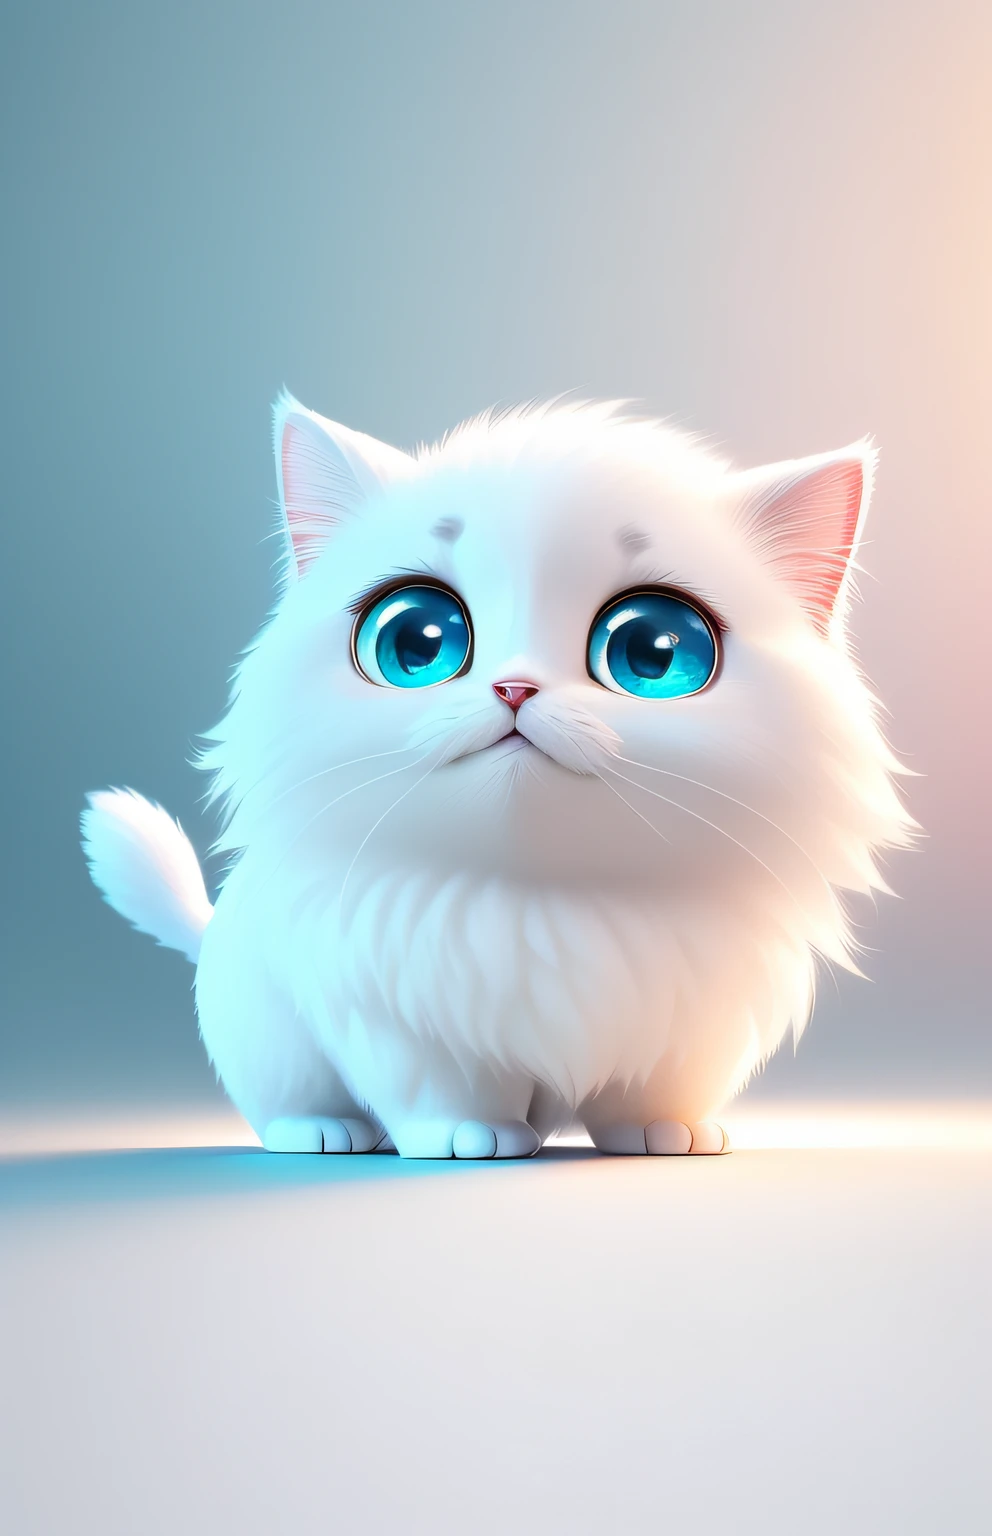 (tmasterpiece), (Need), (super-fine), (full bodyesbian:1.2), ultra cute, Baby, Pixar, Baby cat, It's a big eye-catcher, fluffly, ssmile, Delicate and delicate, Fairytales, Incredibly high detail, pixar-style, bright color palette, natural soft light, Simple background in solid color, Octane rendering, Trends on Artstation, opulent, ultra-wide-angle, 8k, k hd, realisticlying